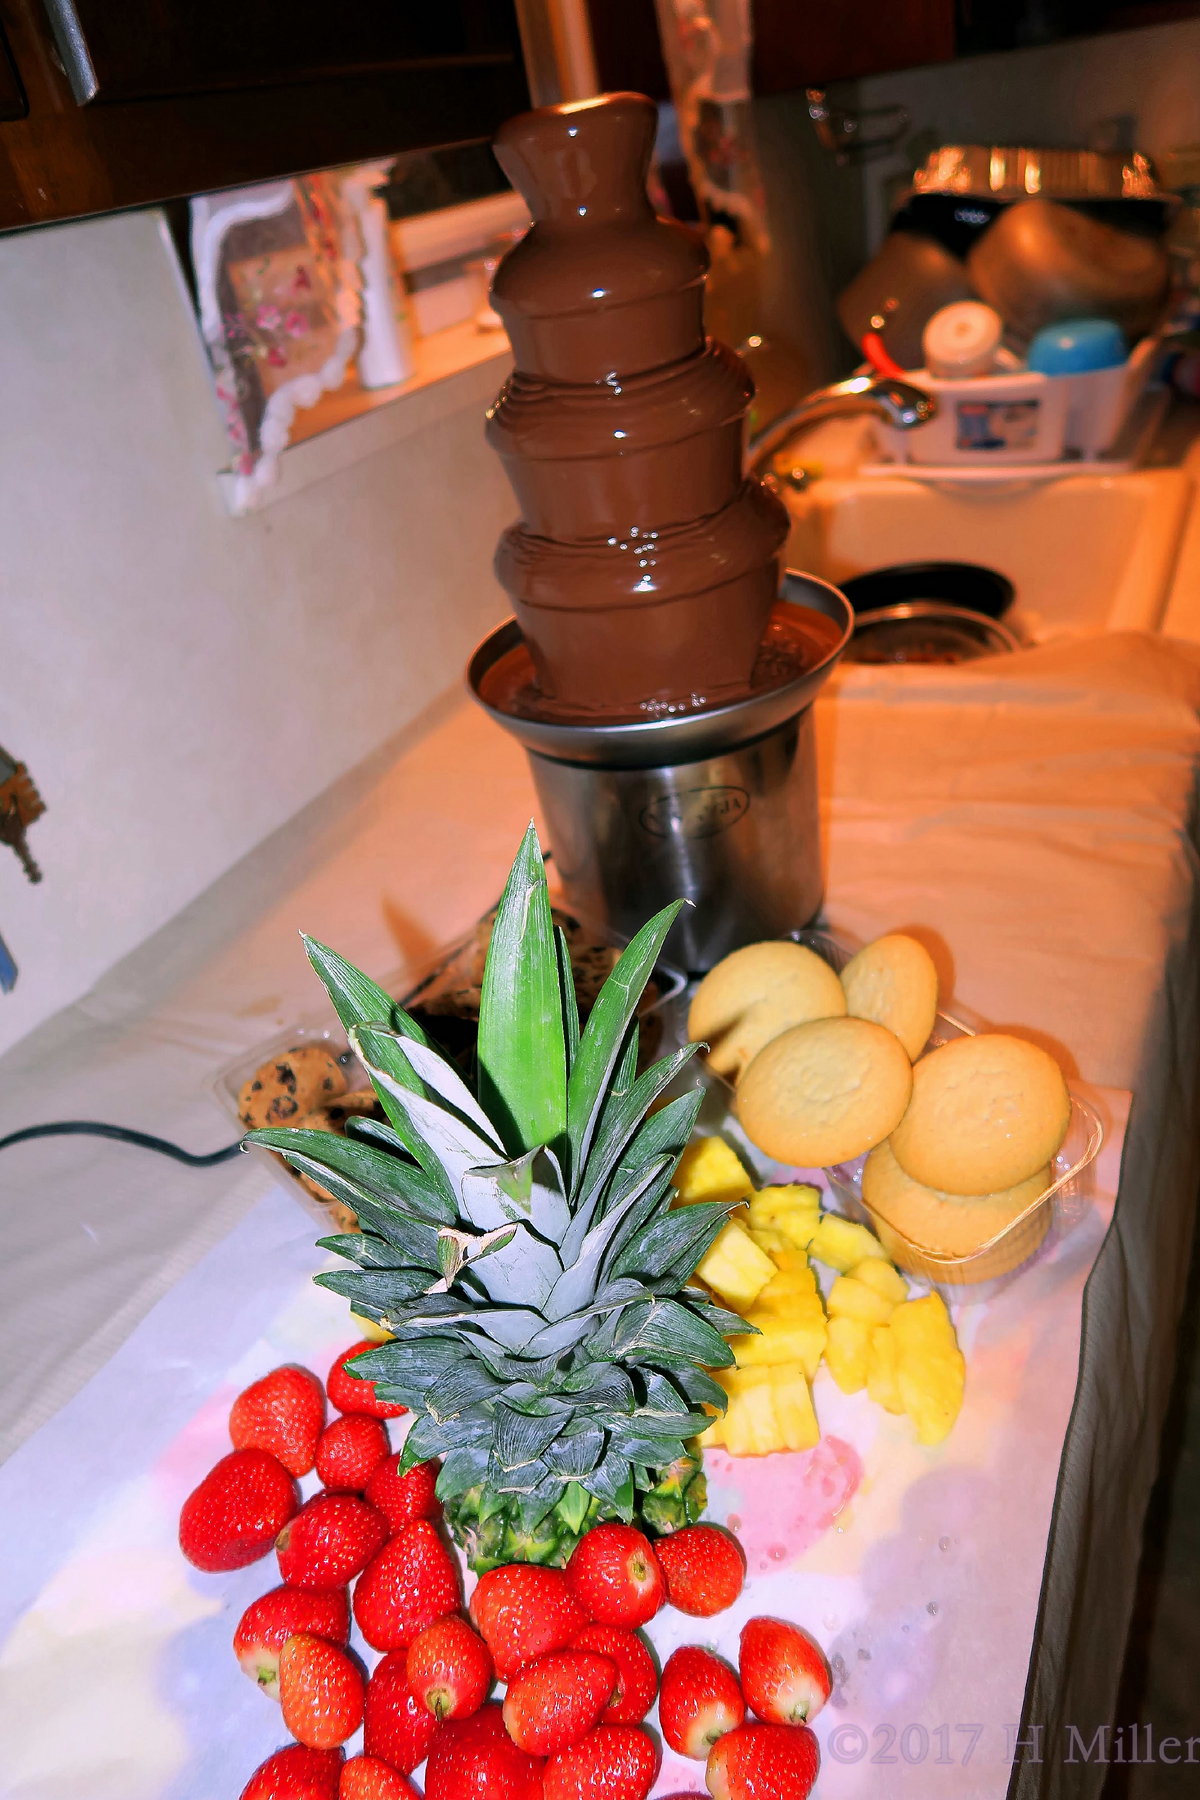 The Chocolate Fountain With Pineapples, Strawberries, And Cookies For Dipping! 